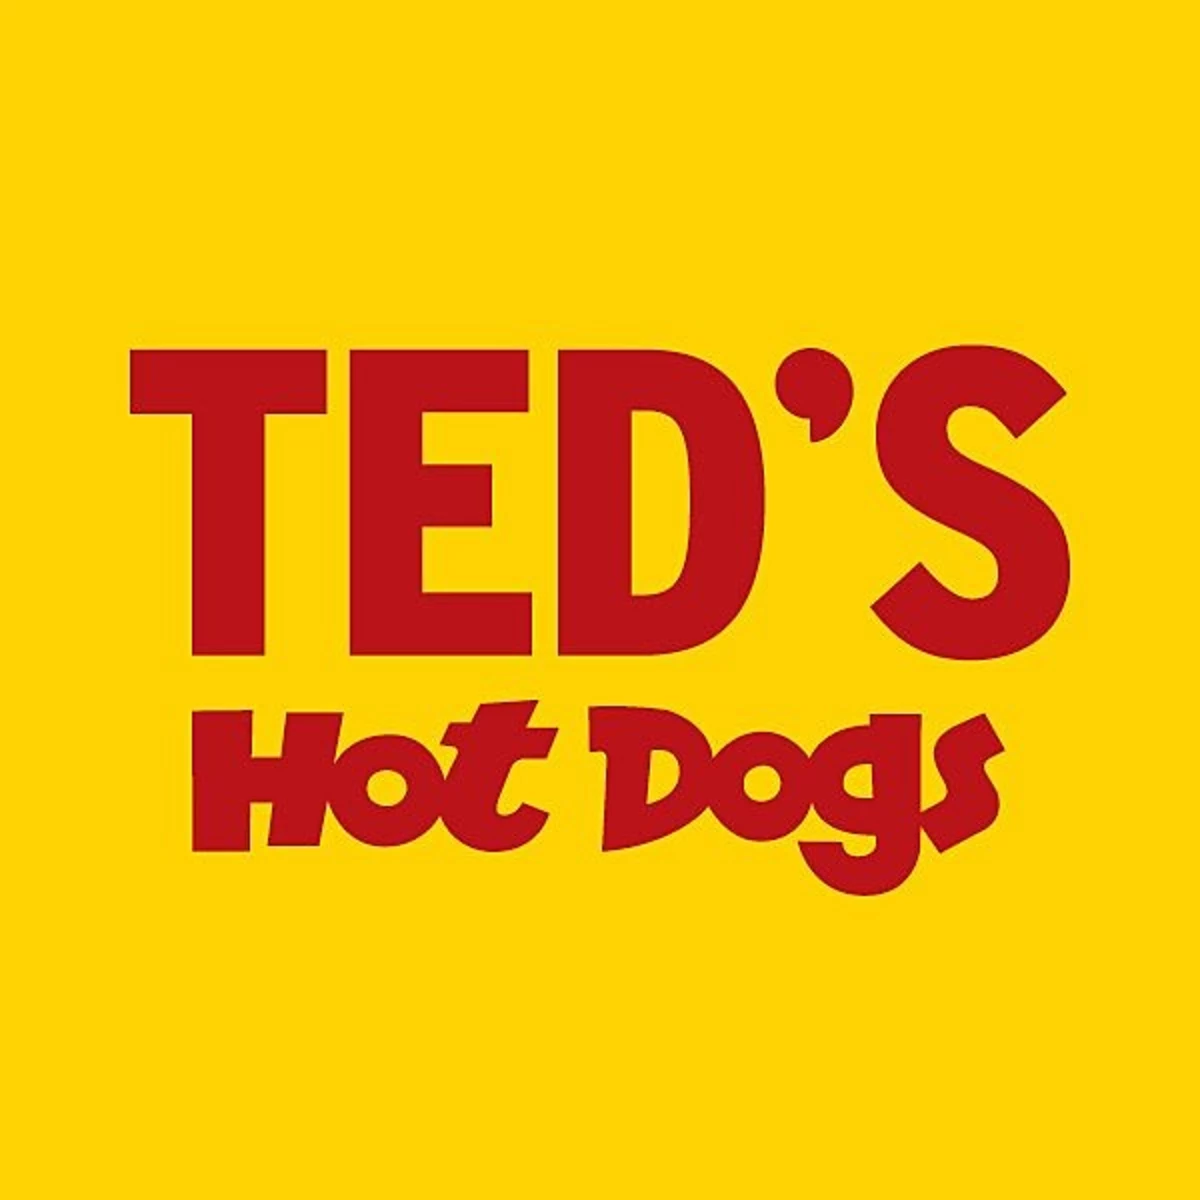 https://townsquare.media/site/10/files/2019/02/Teds-Hot-Dogs-facebook.jpg?w=1200&h=0&zc=1&s=0&a=t&q=89